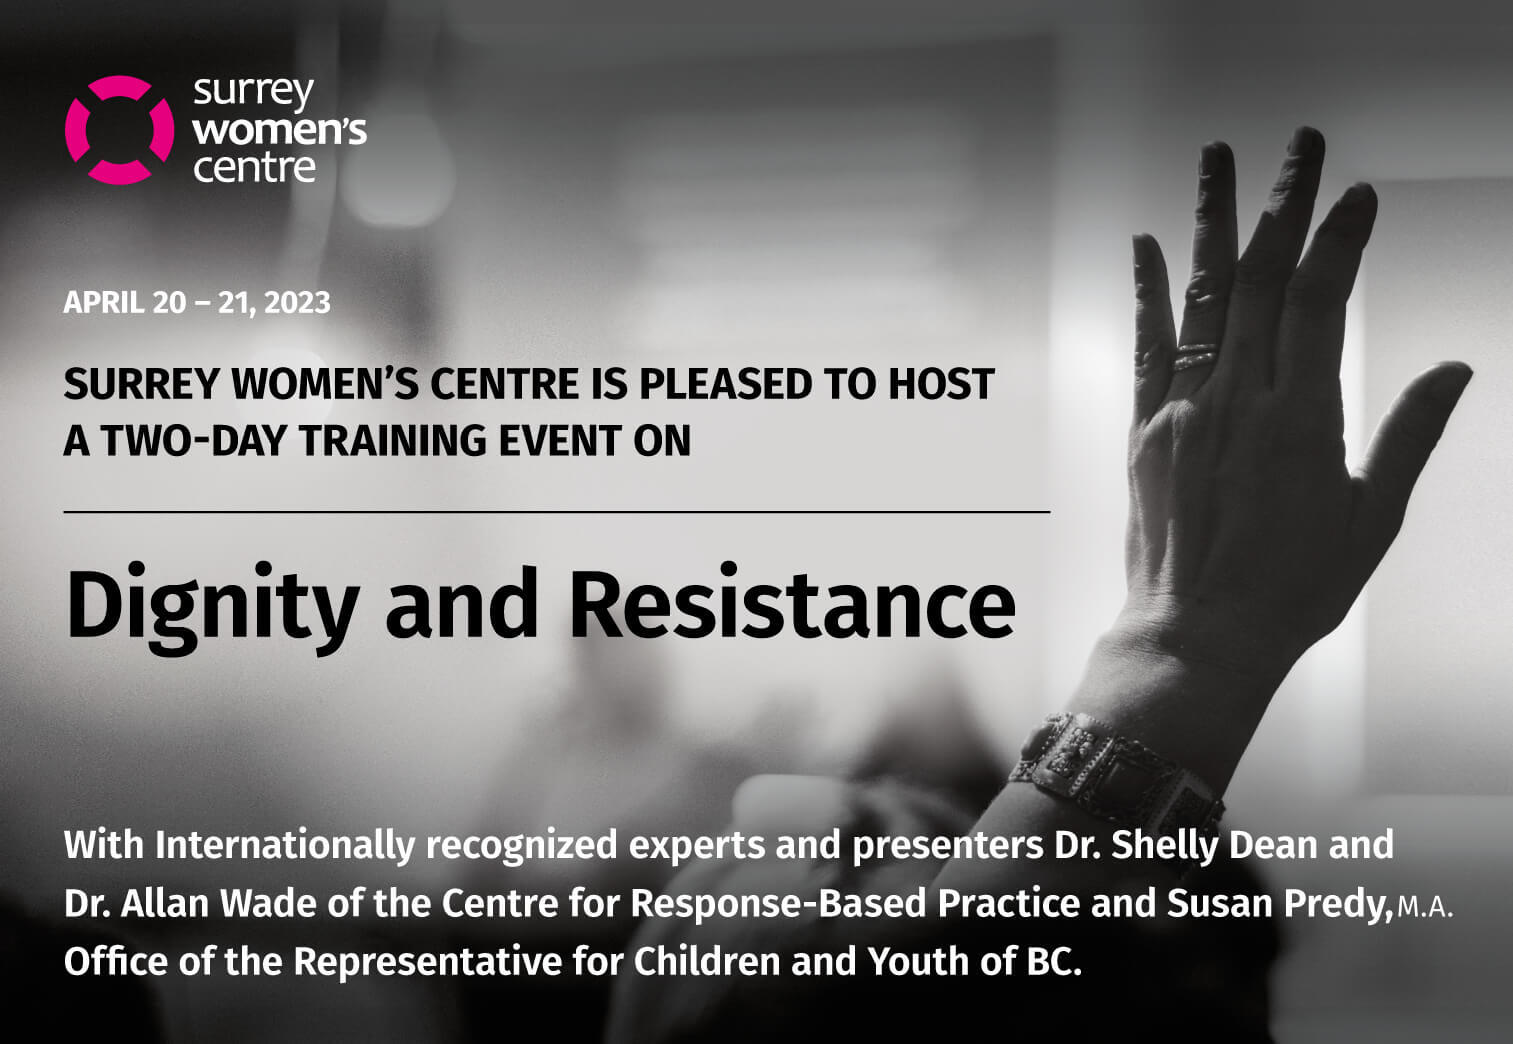 Two-Day Training Event on Dignity and Resistance